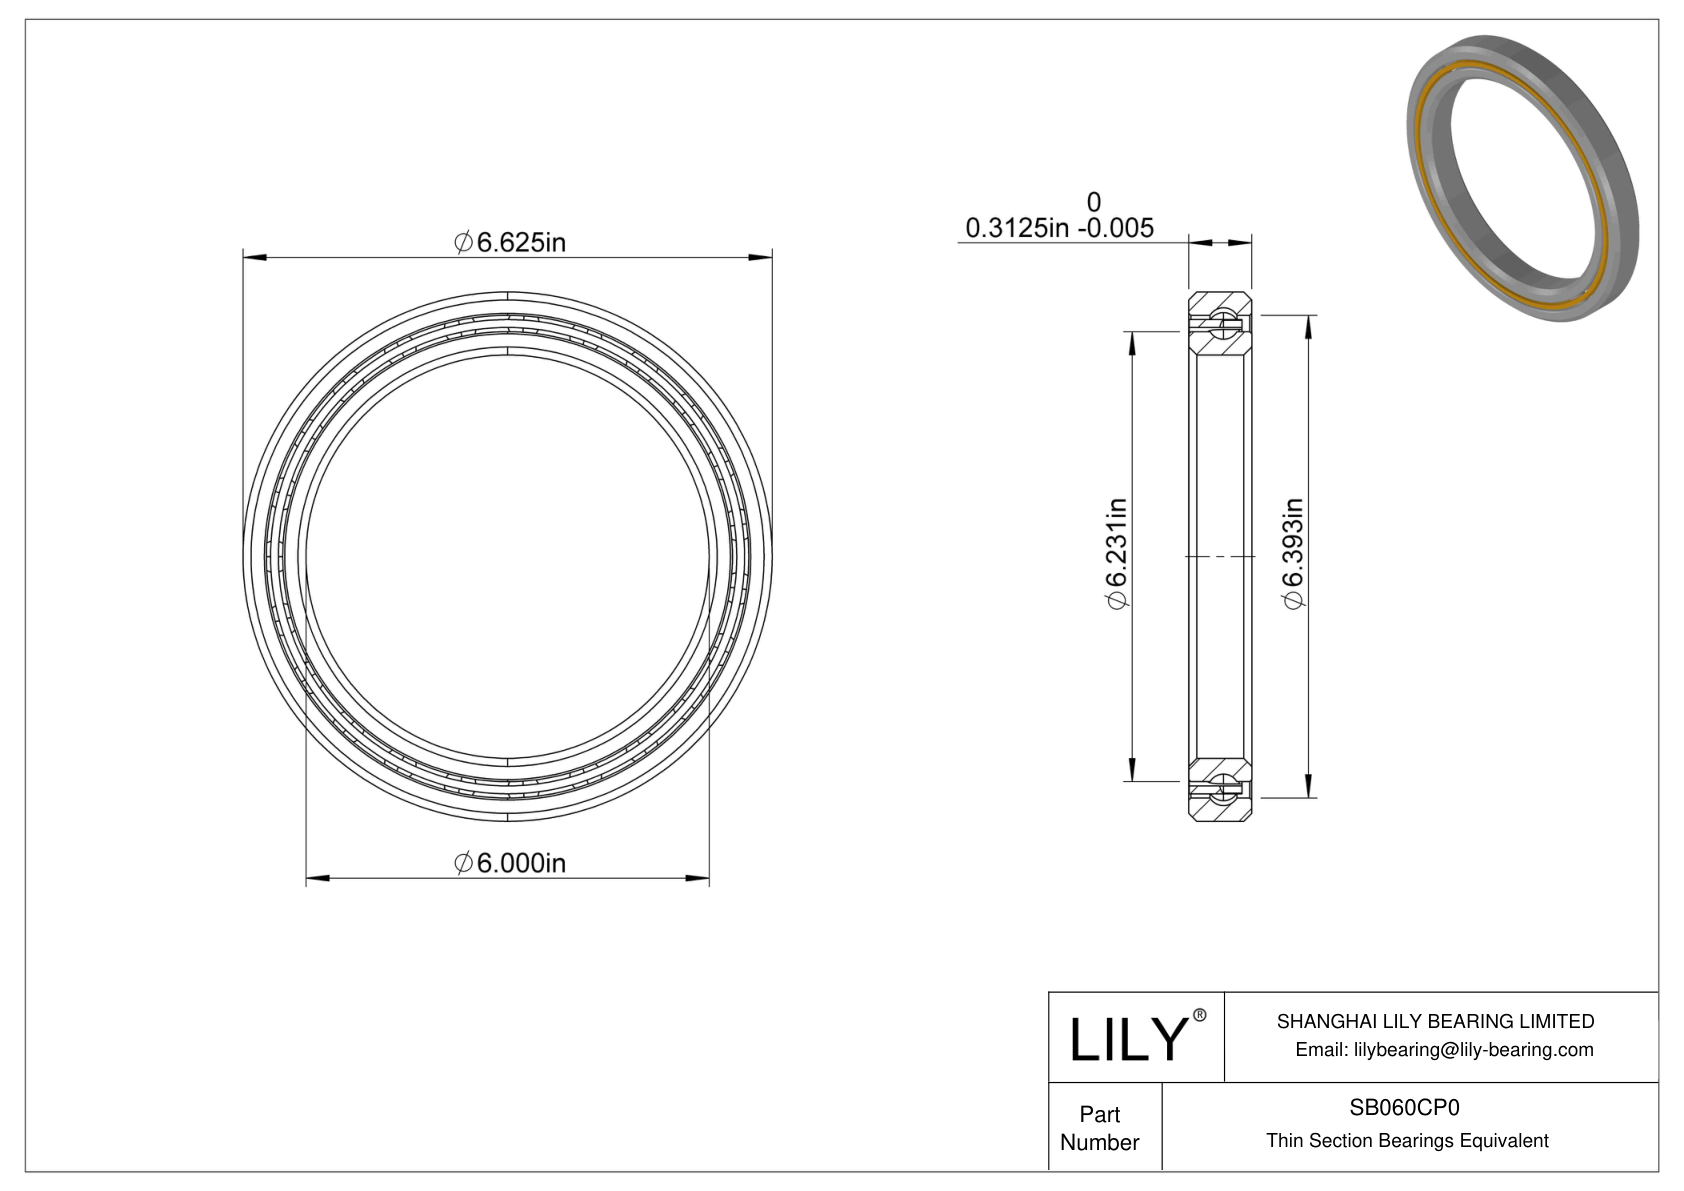 SB060CP0 Constant Section (CS) Bearings cad drawing